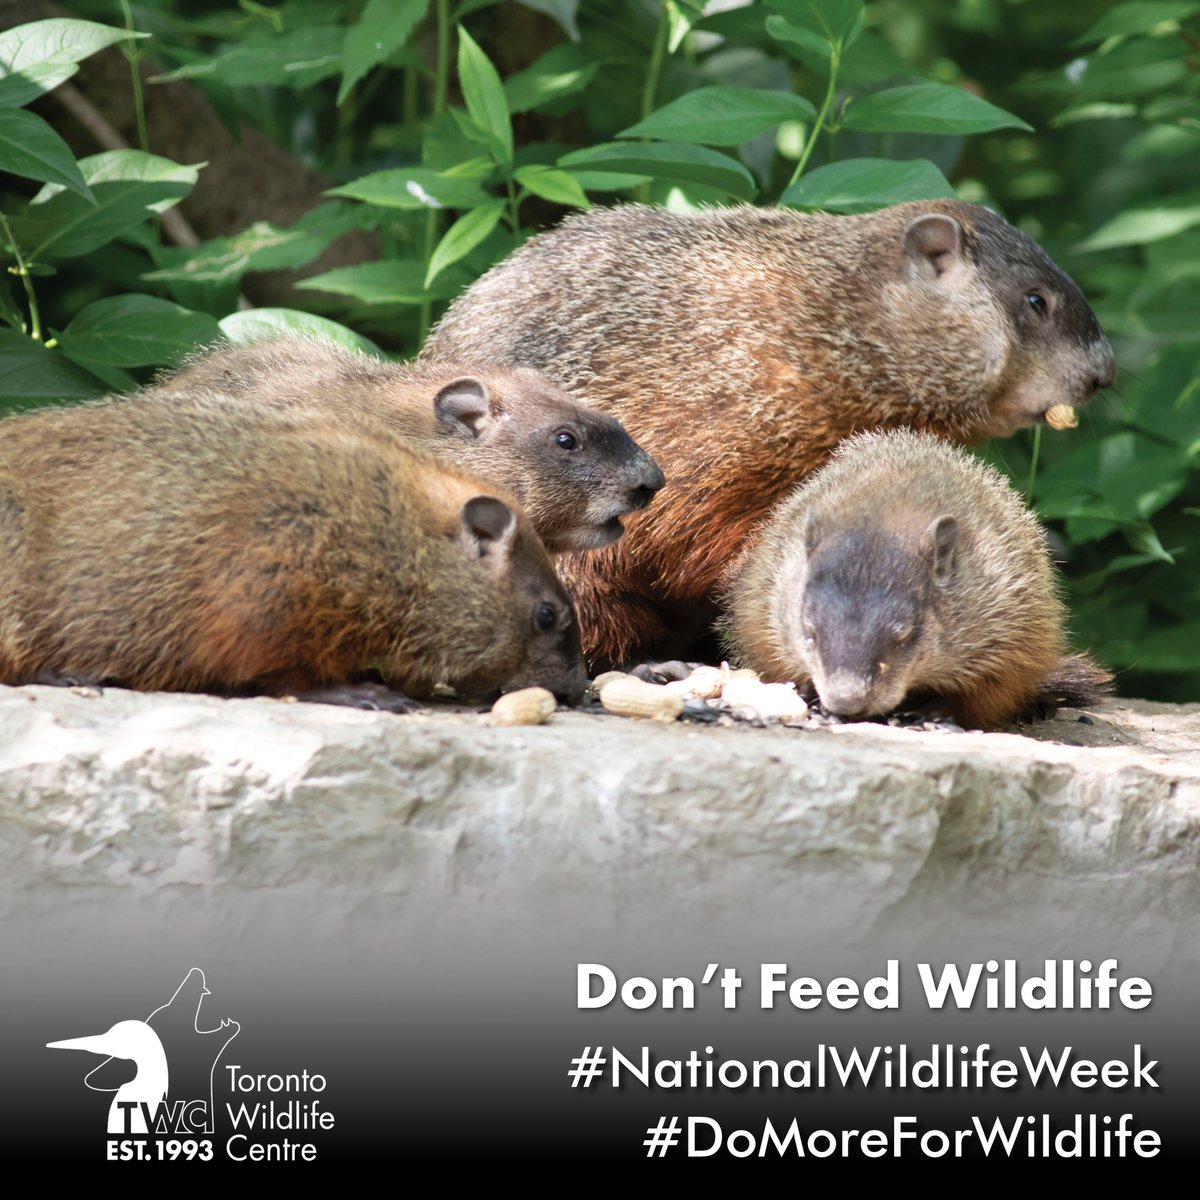 As of April 1st, a municipal bylaw was instated making it illegal to feed wildlife in Toronto.
Feeding wildlife alters their behaviour, putting their safety at risk. #DoMoreForWildlife by planting native species that provide a natural source of food/shelter.
#NationalWildlifeWeek